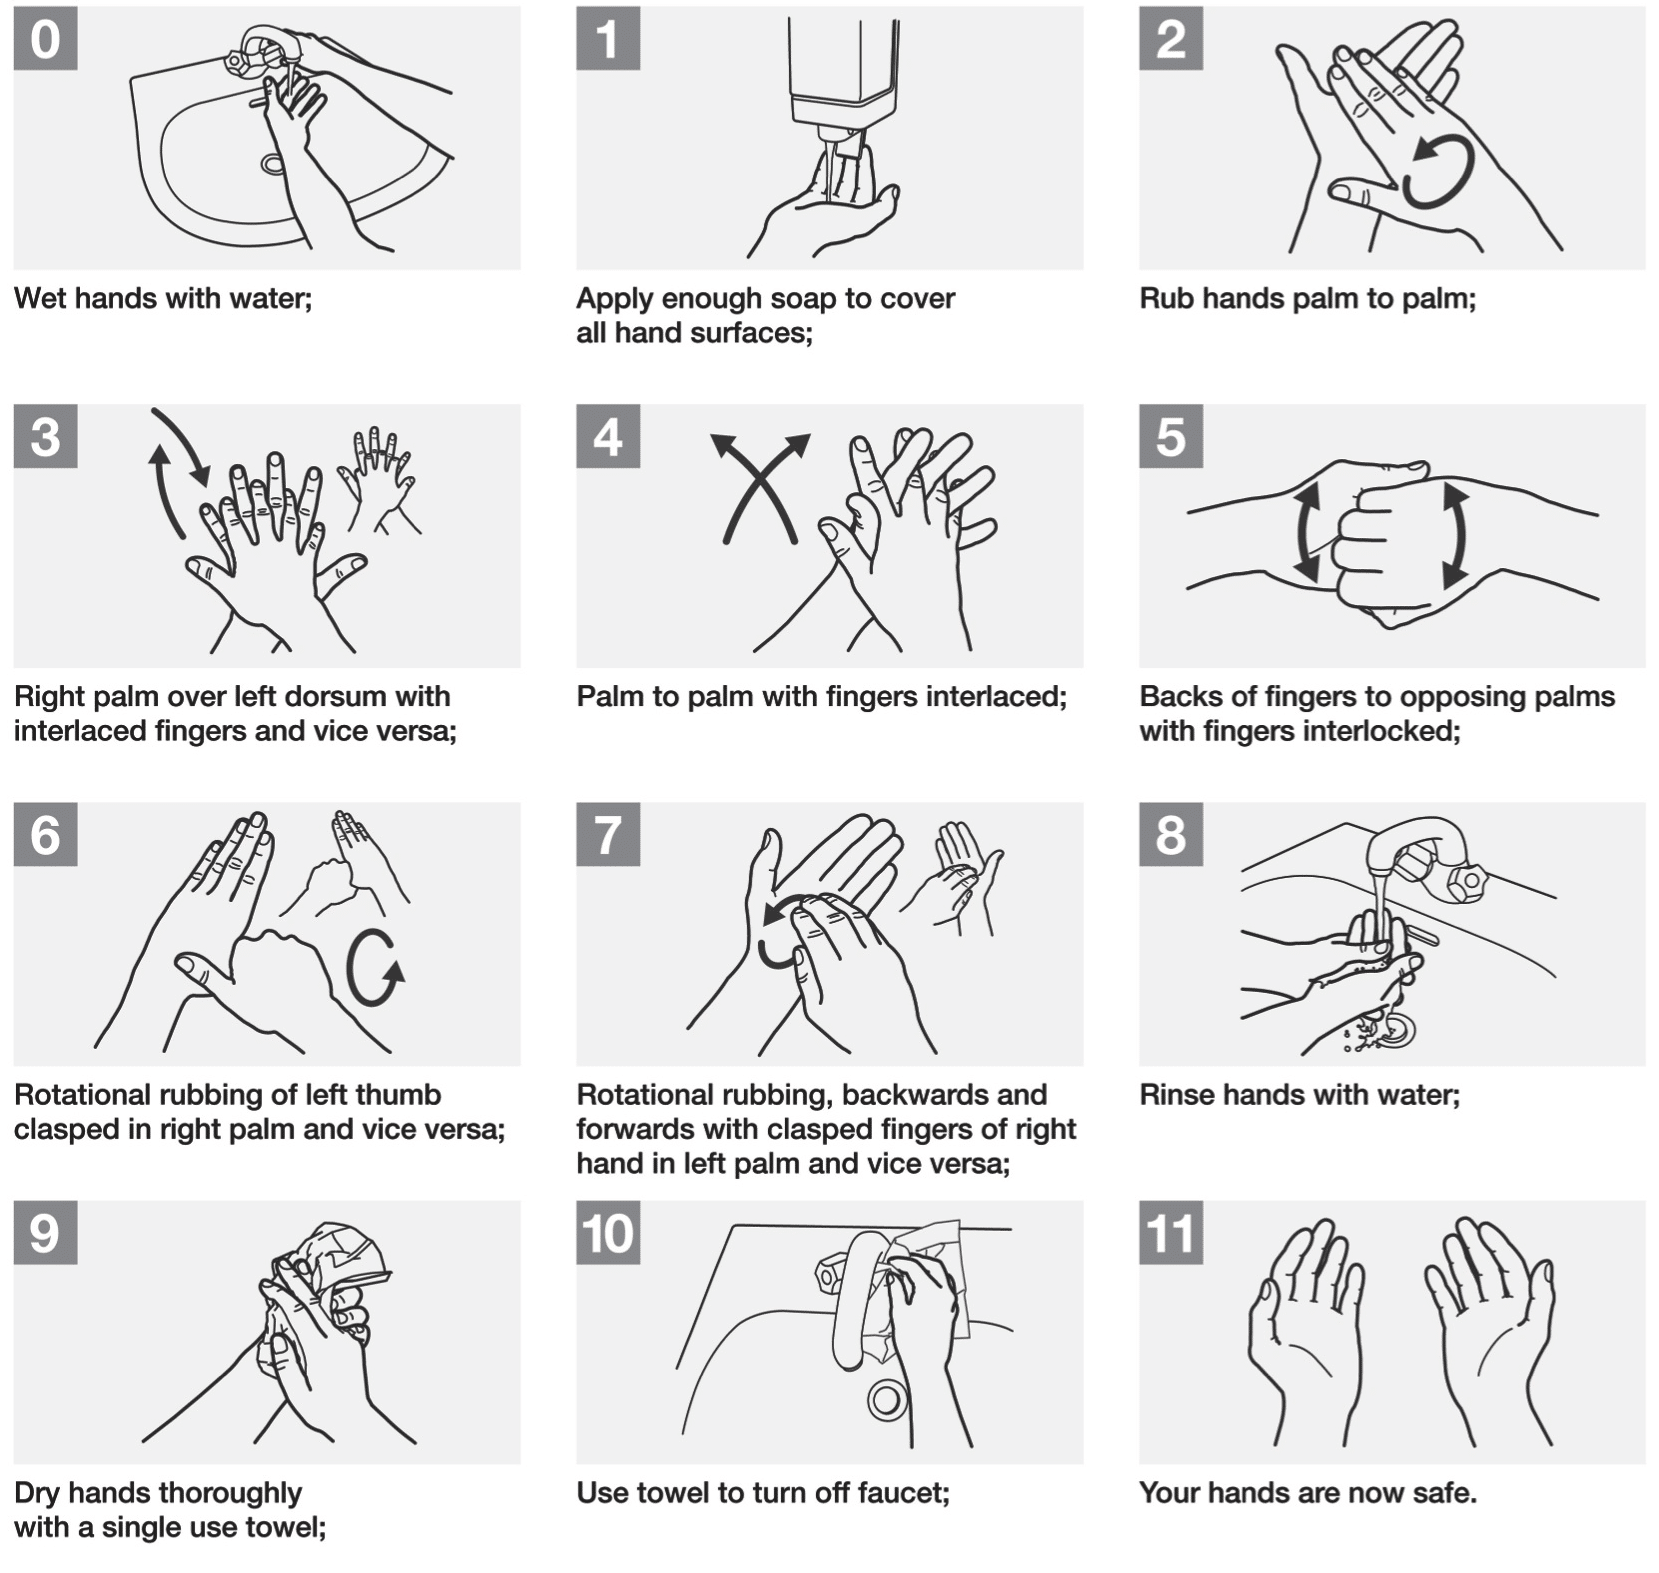 Hand washing advice for people with skin conditions